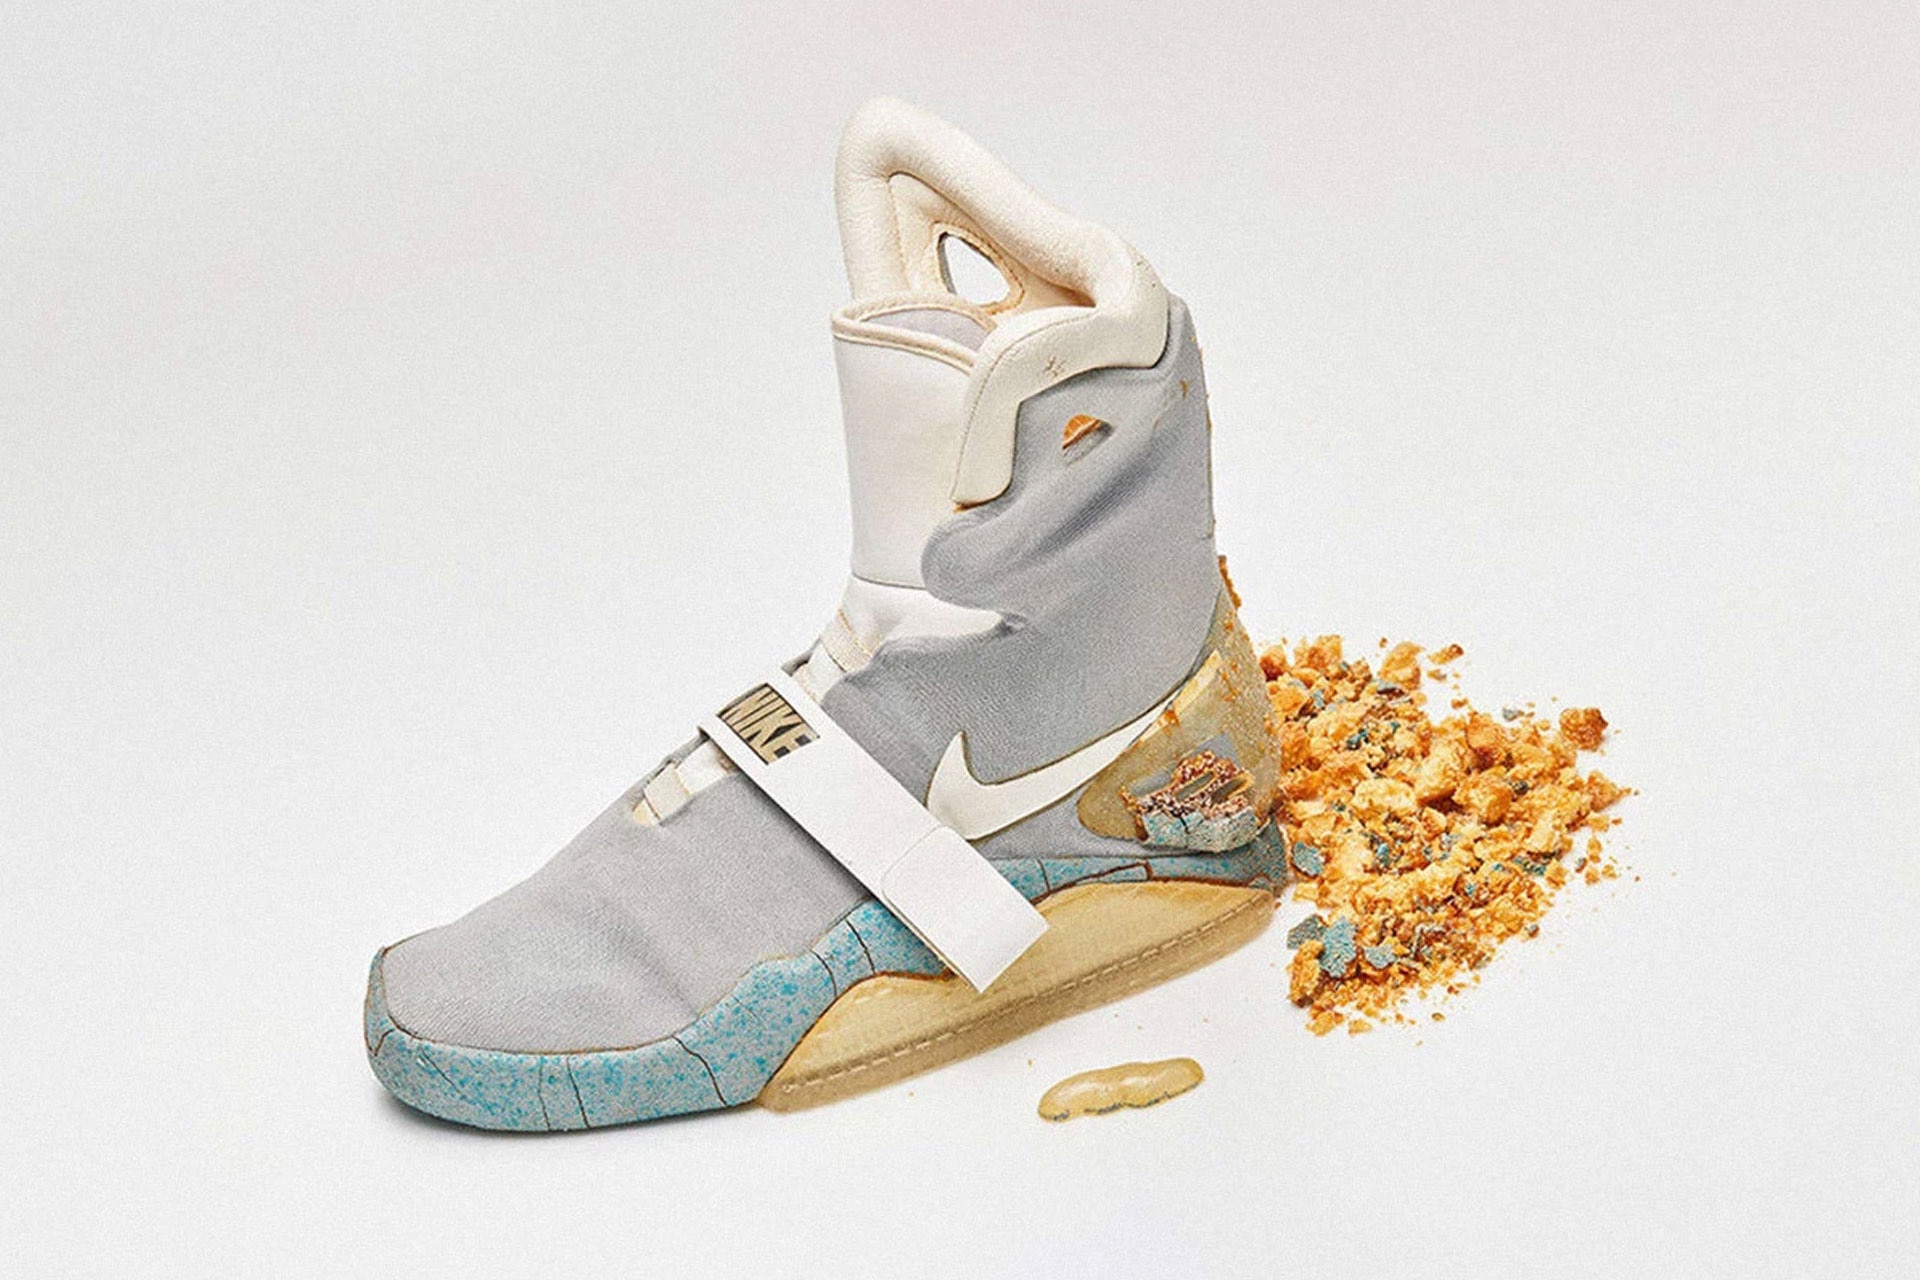 Nike 'Waffle Shoe' becomes the most expensive sneakers ever auctioned